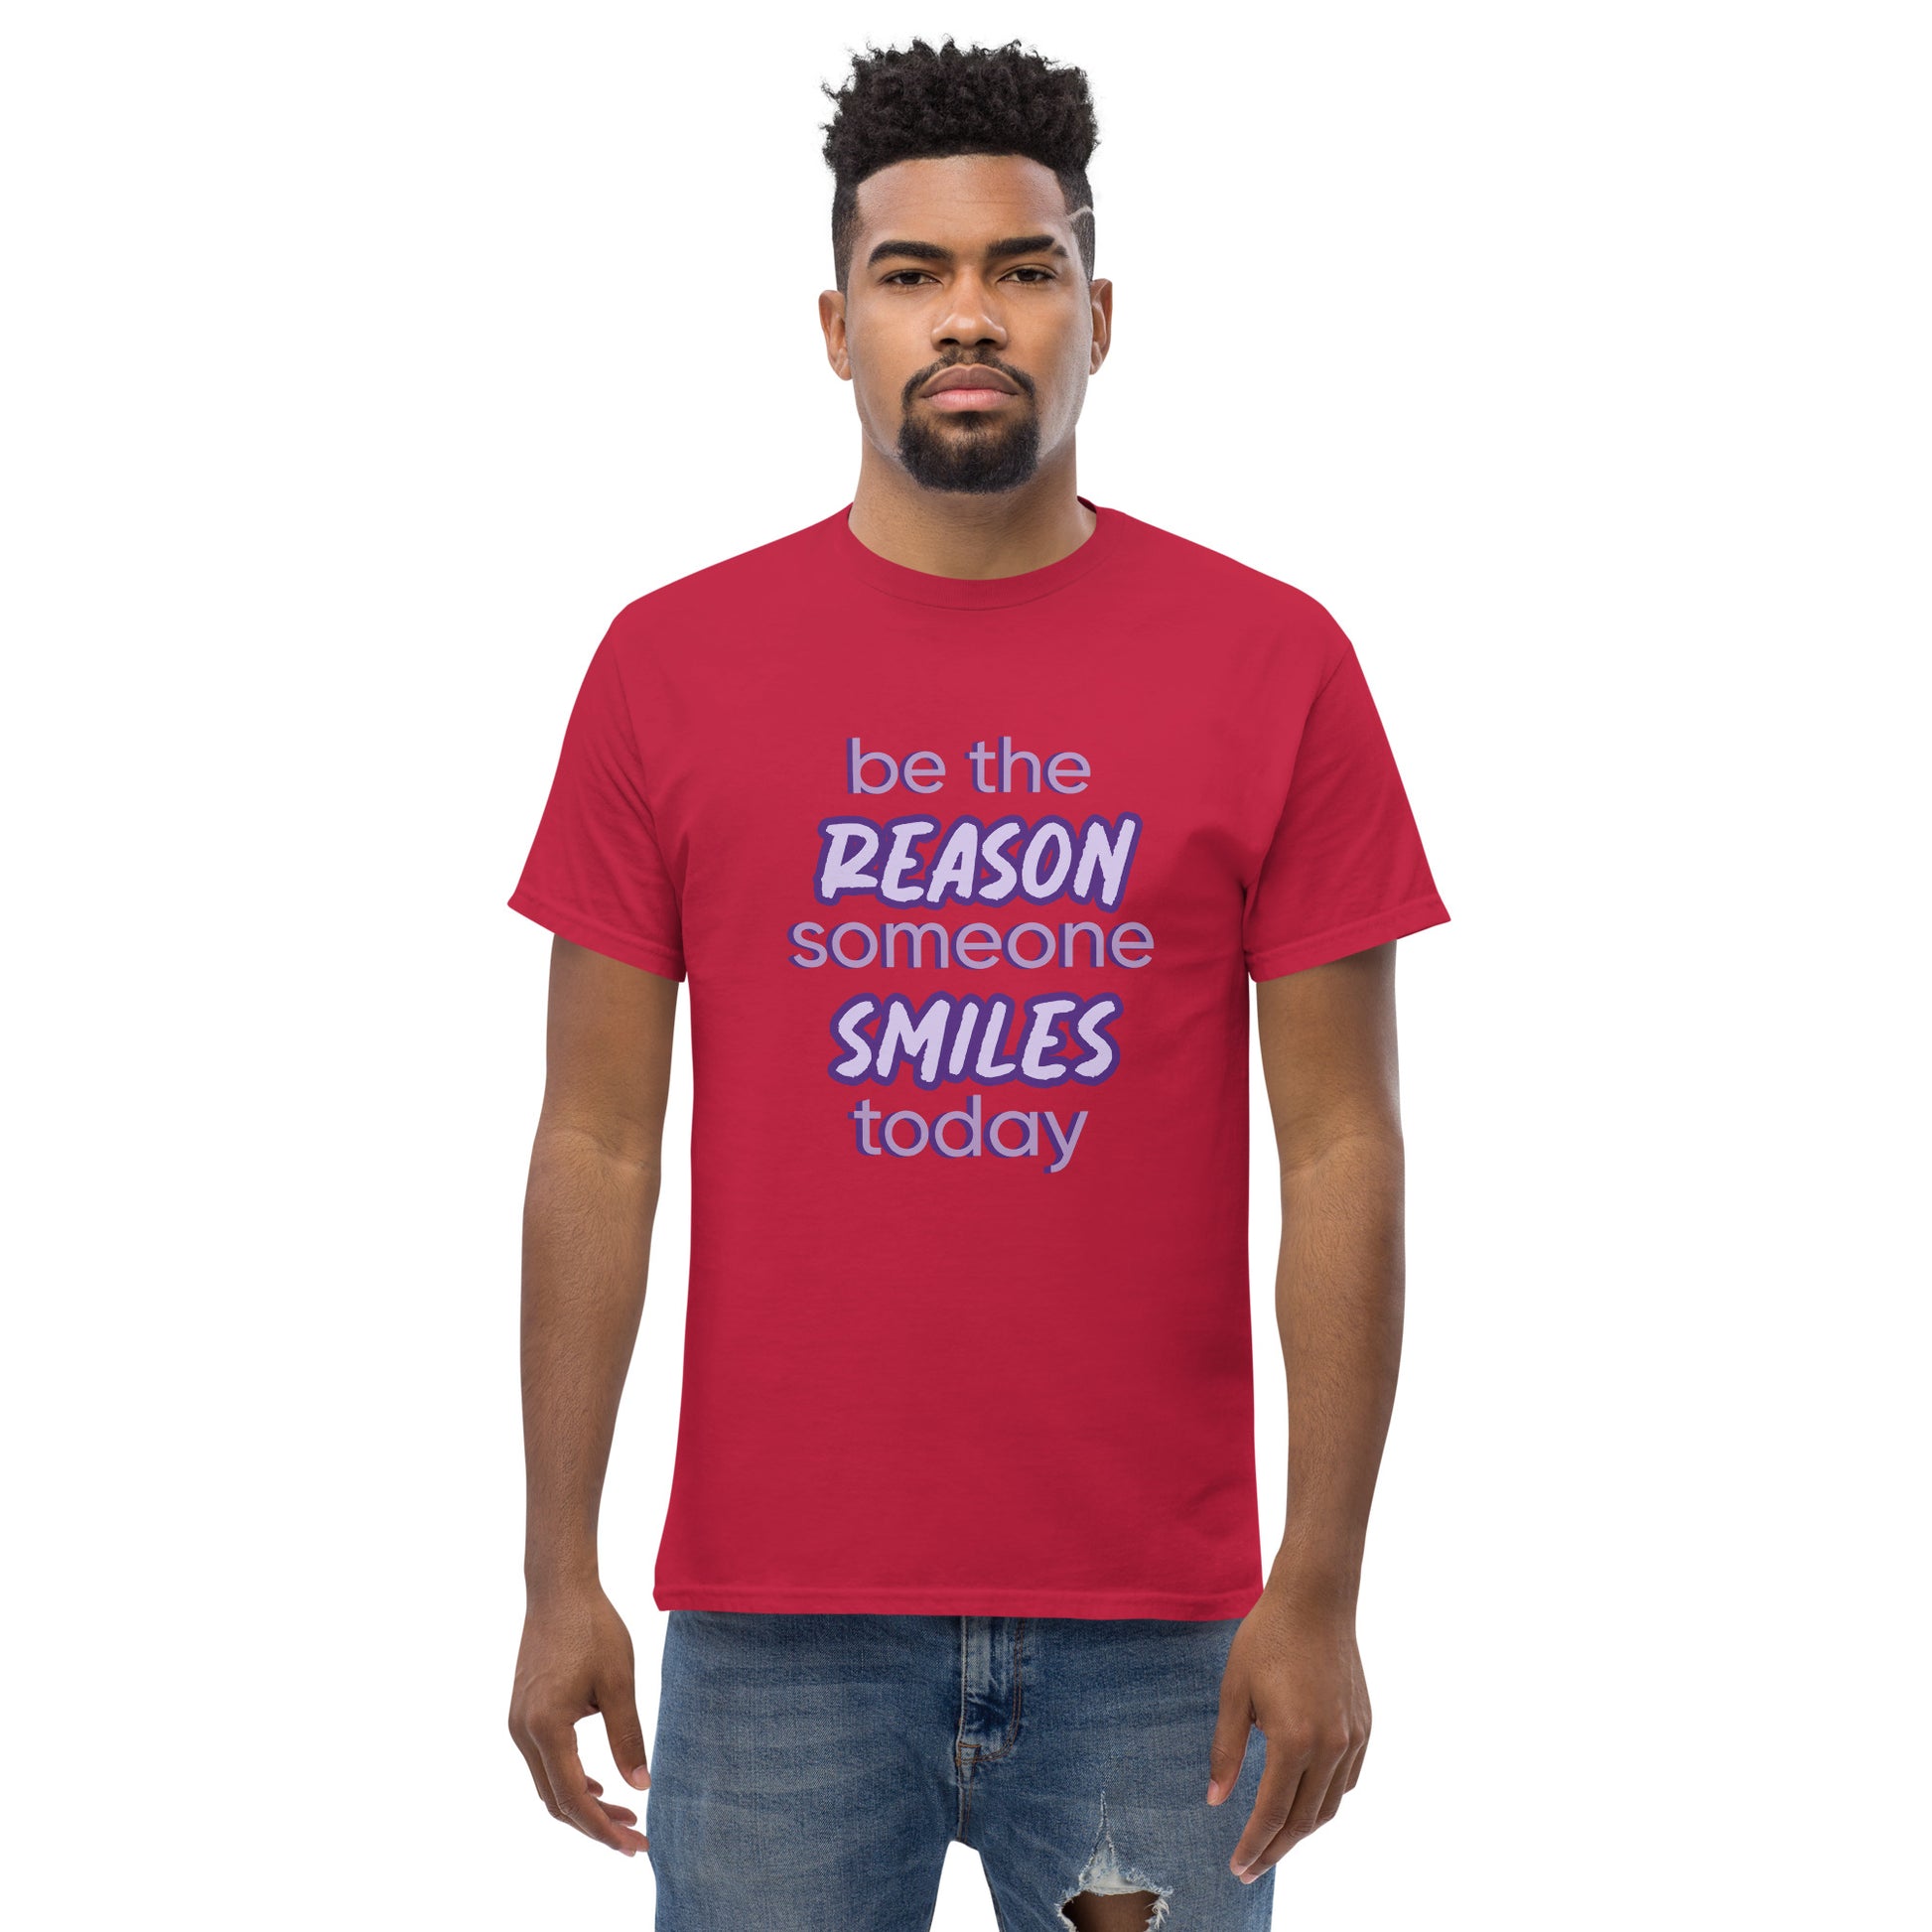 Men with cardinal T-shirt and the quote "be the reason someone smiles today" in purple on it. 